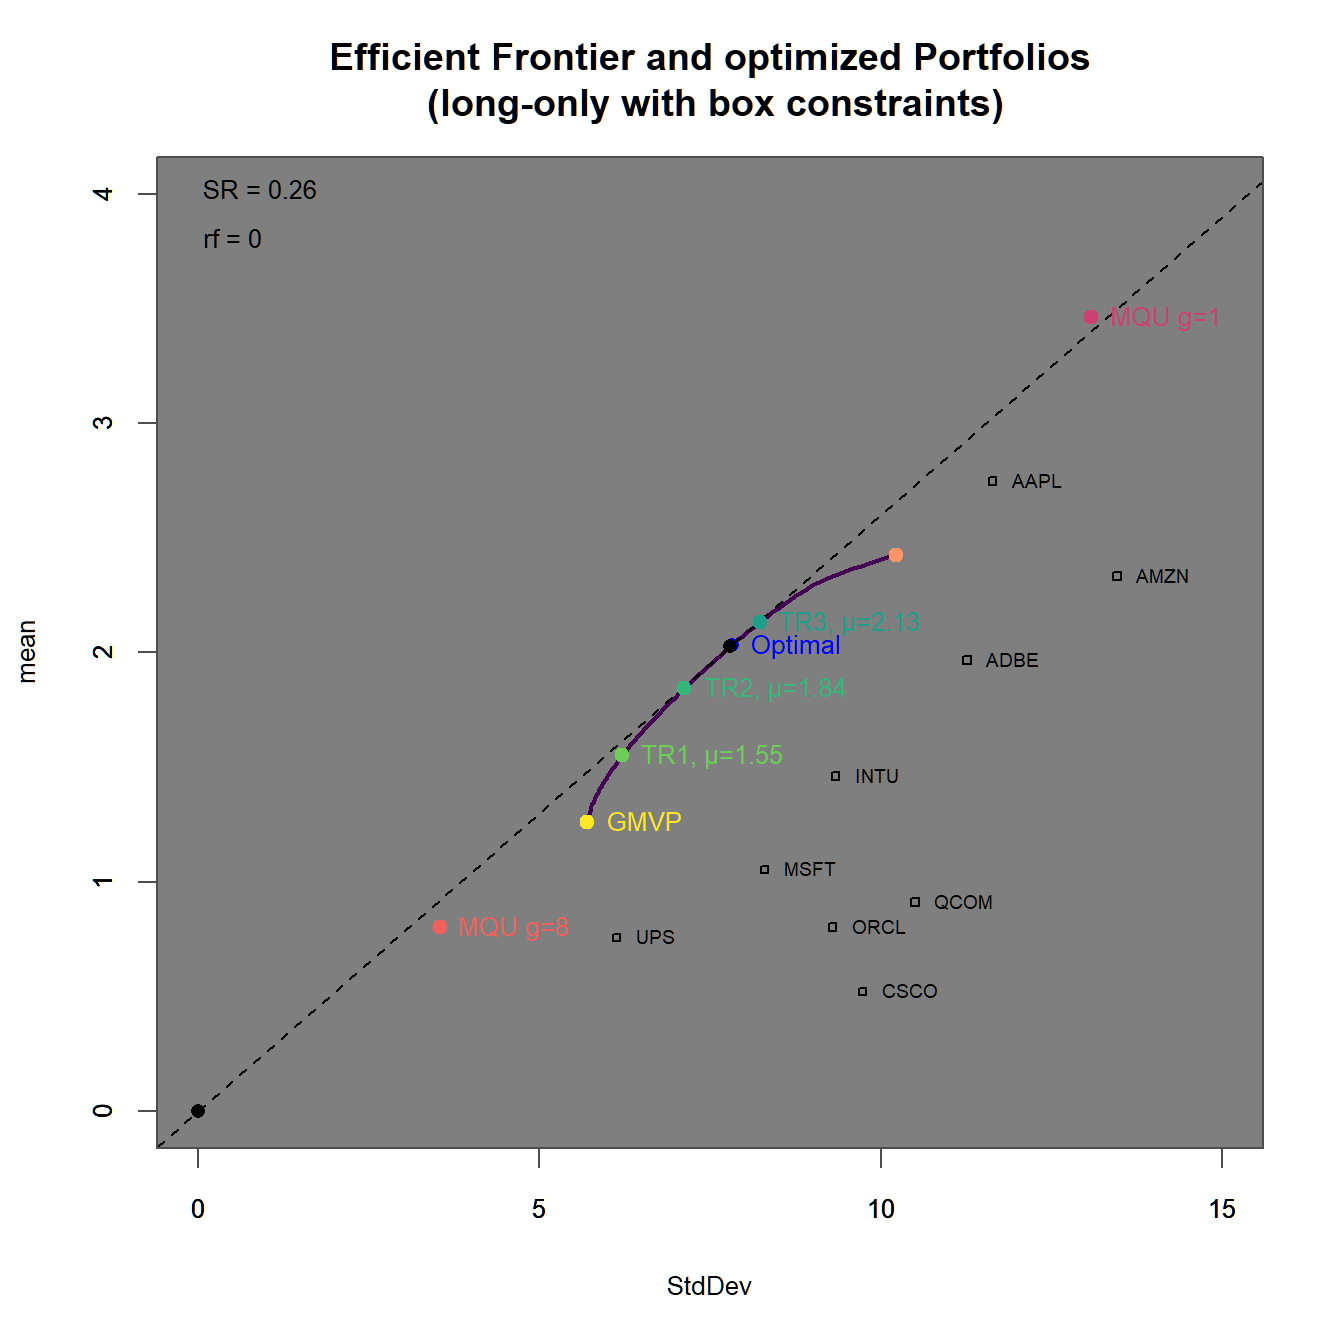 Efficient frontier with an optimized portfolio overlay.